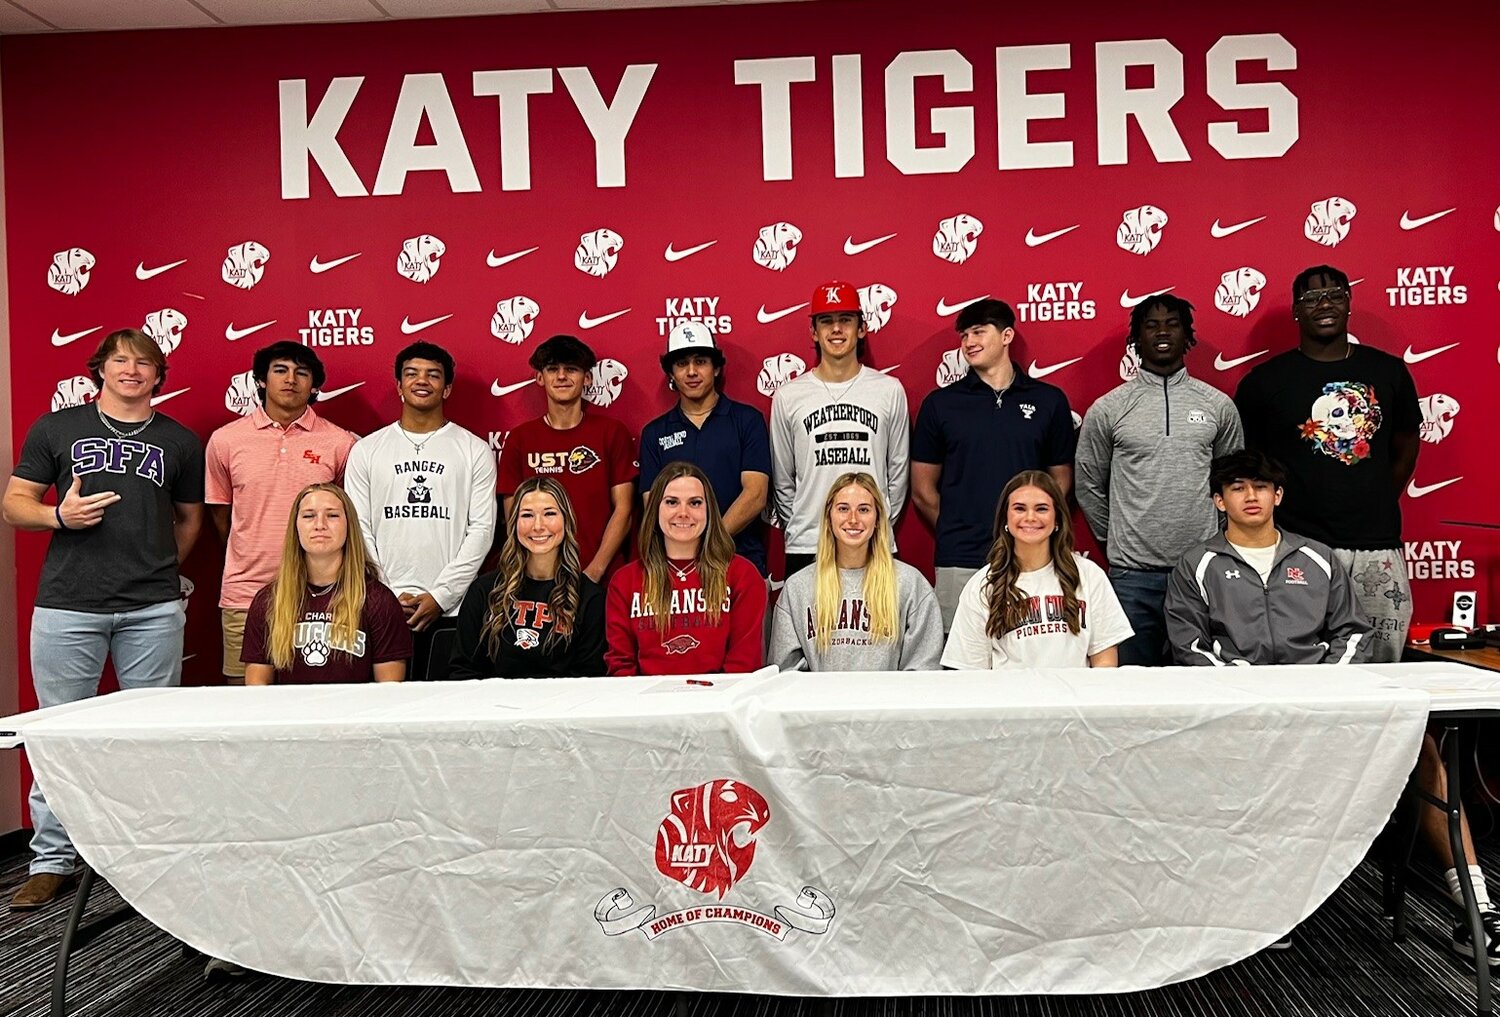 Katy student-athletes pose for a photo during the signing ceremony at Katy High School.